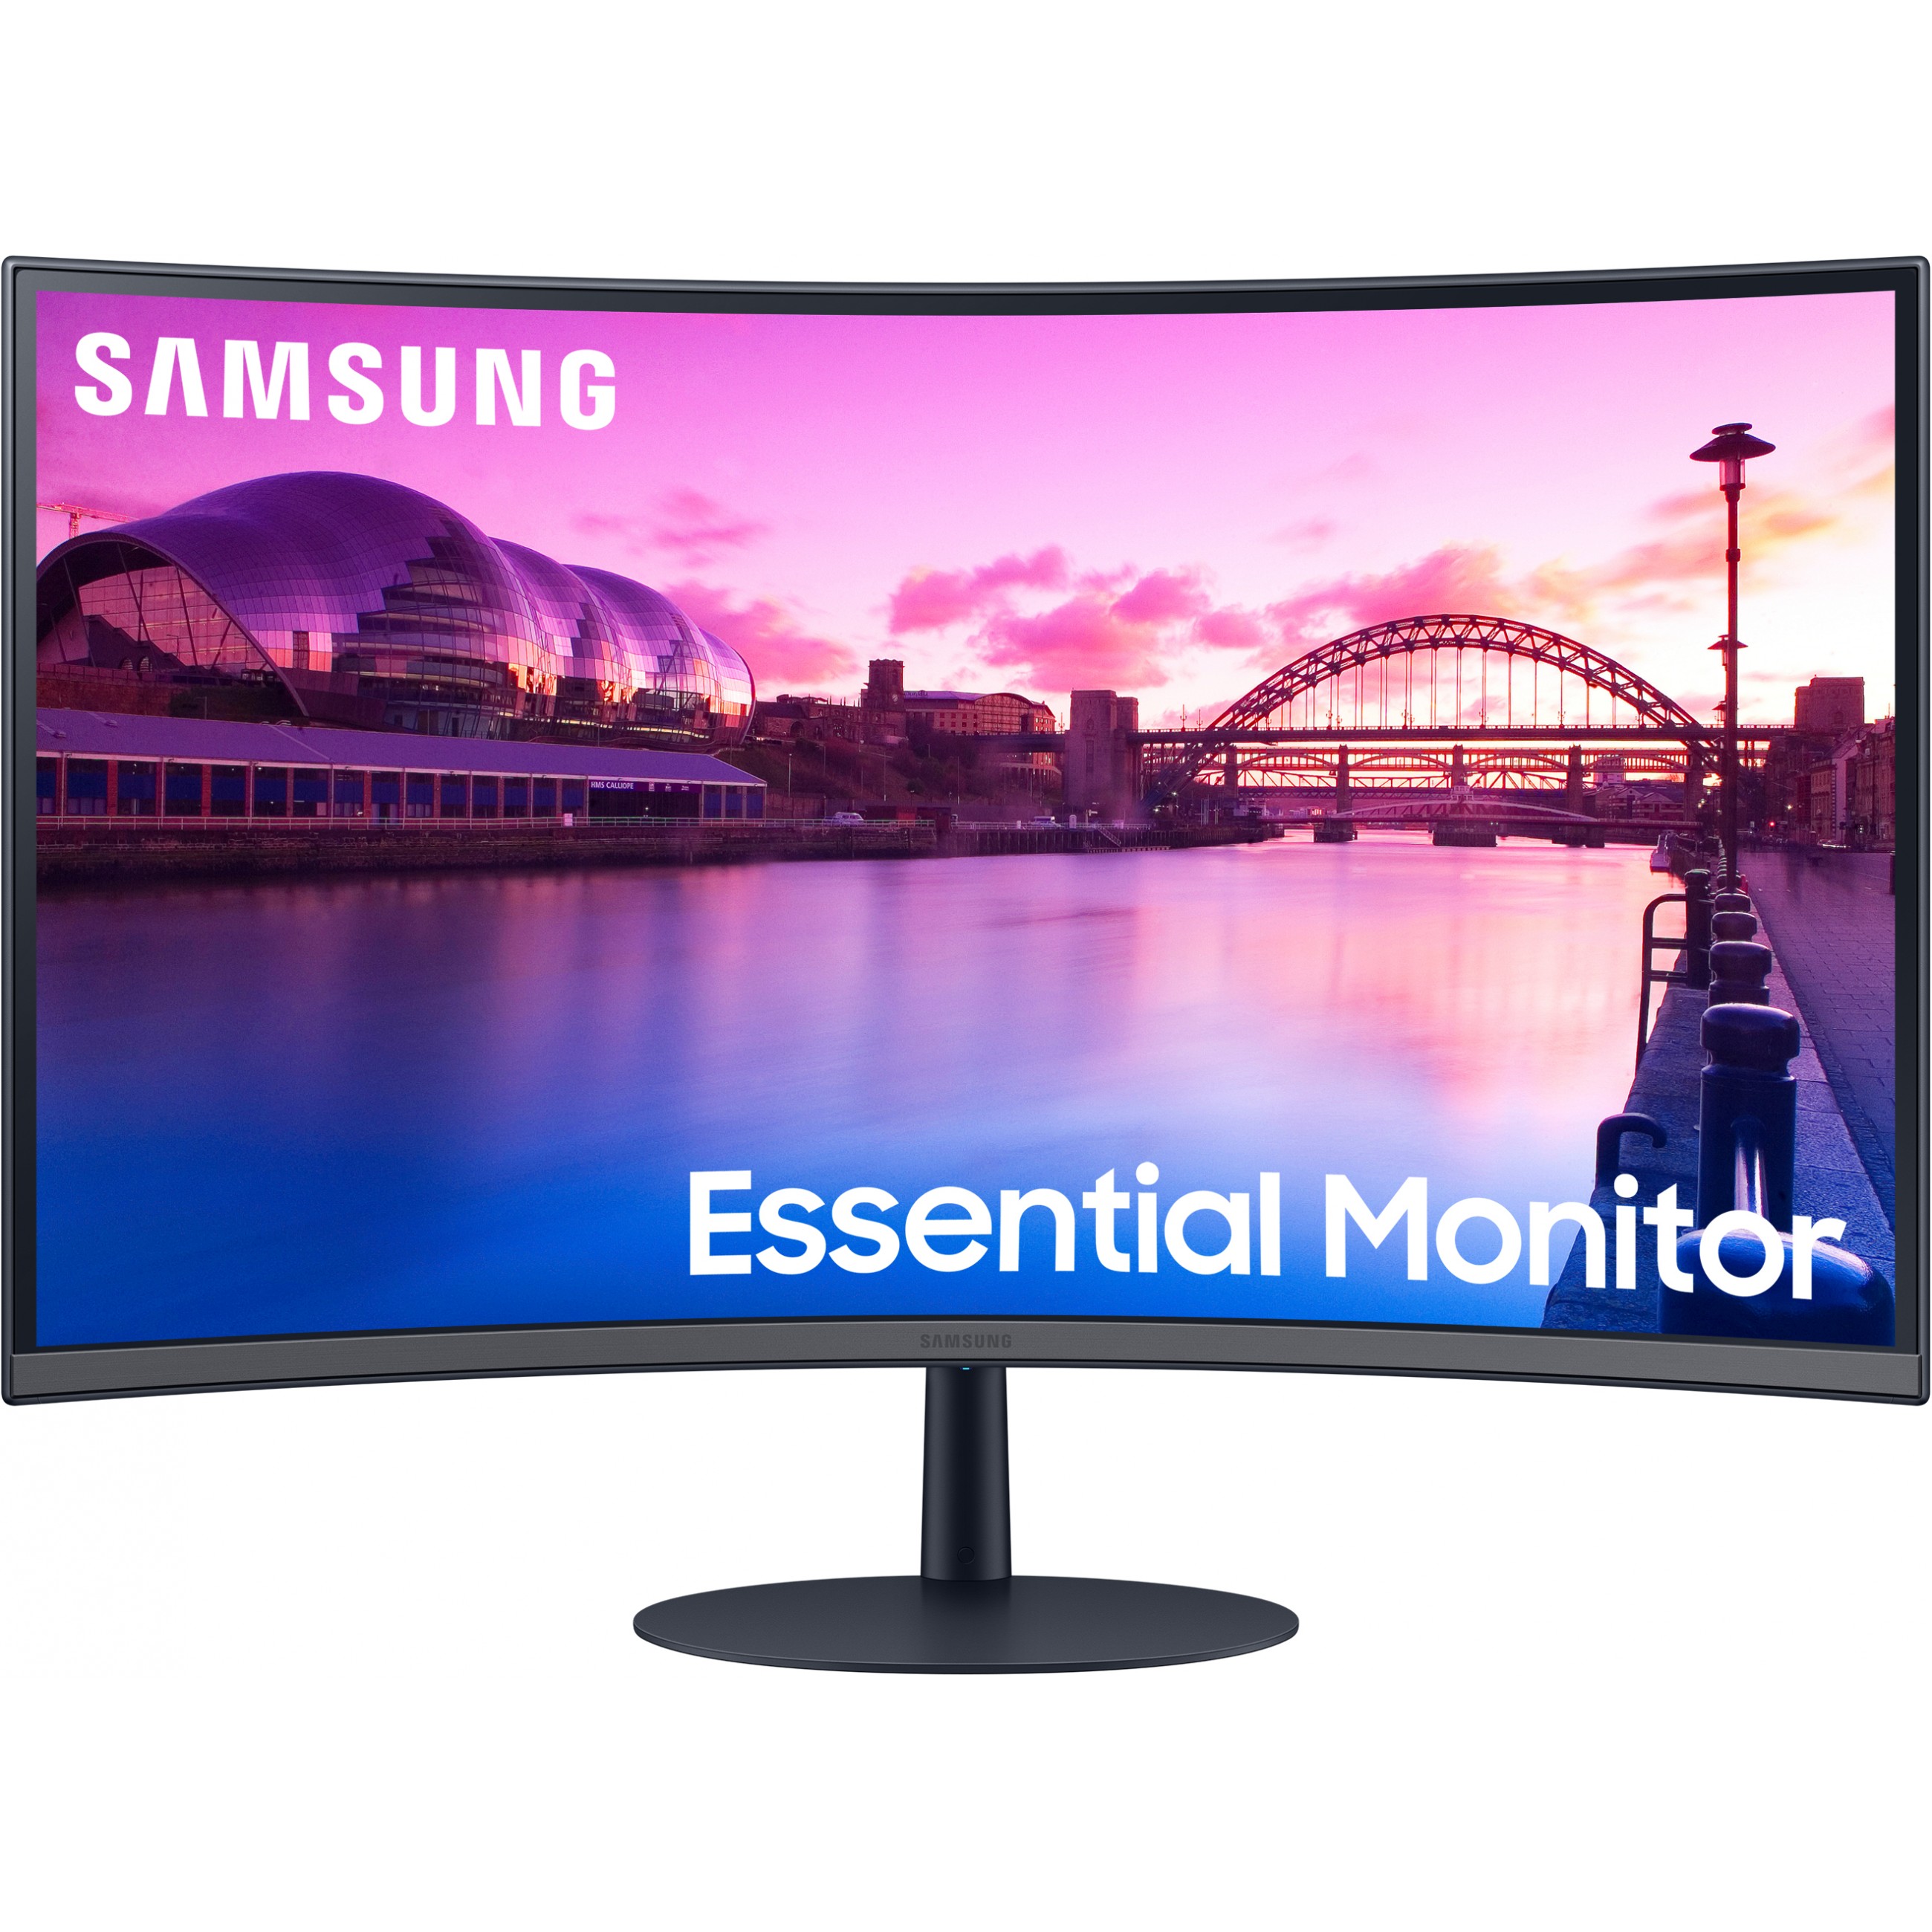 Samsung Essential Monitor S39C LED display - LS27C390EAUXEN